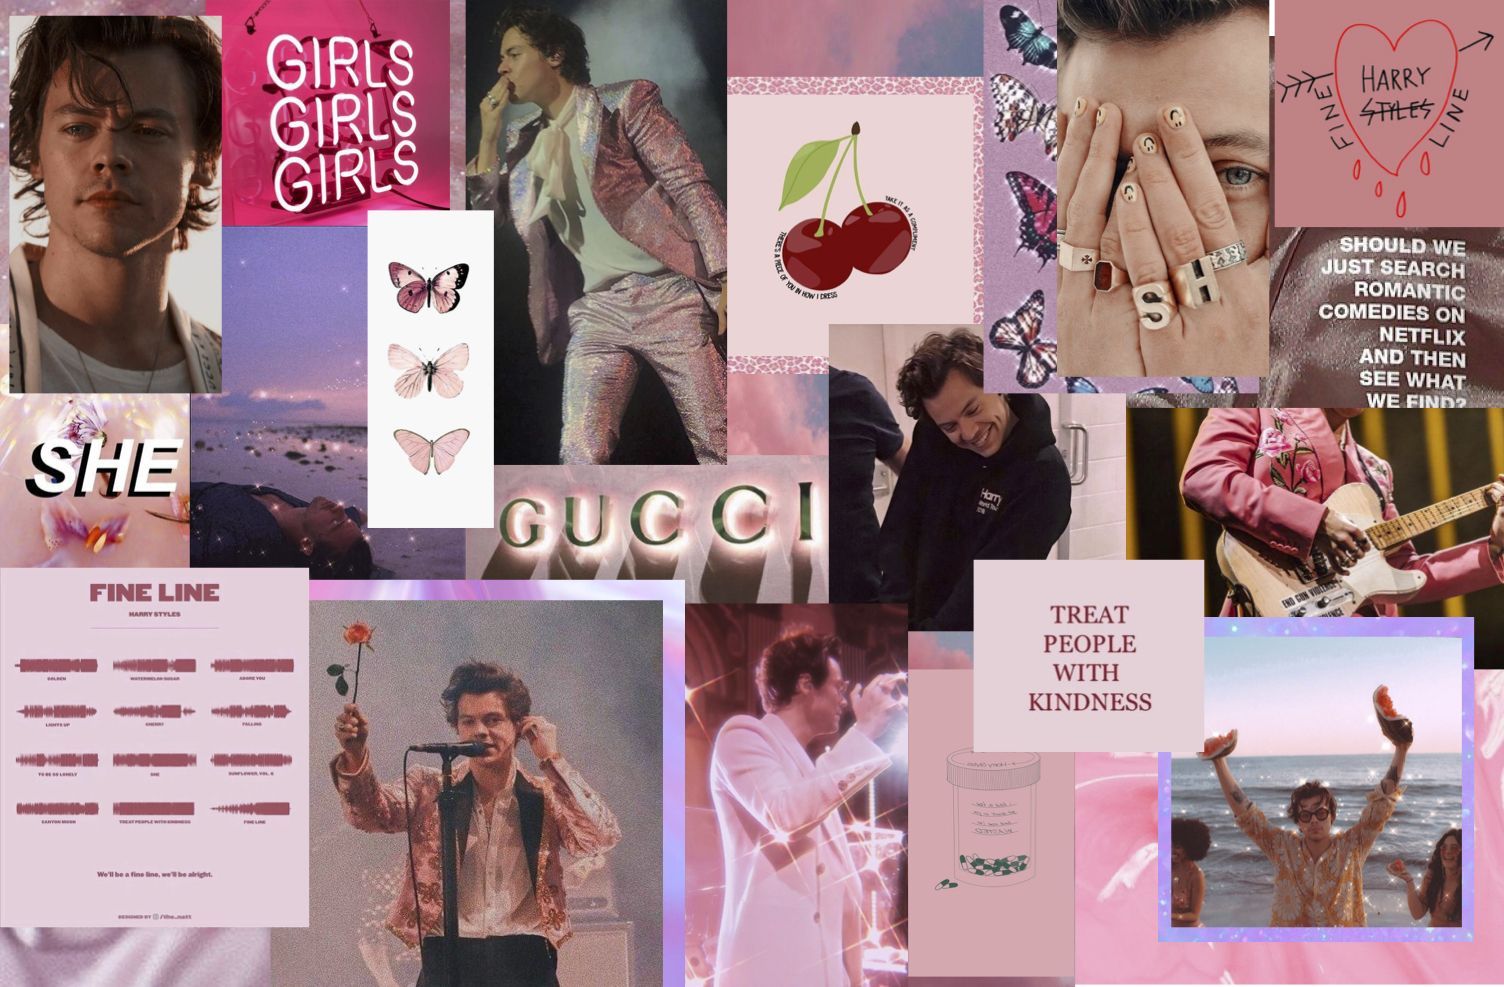 Harry Styles collage, mood board, aesthetic, pink, Gucci, butterflies, cherries, treat people with kindness, Fine Line, Netflix, she, girls - Harry Styles